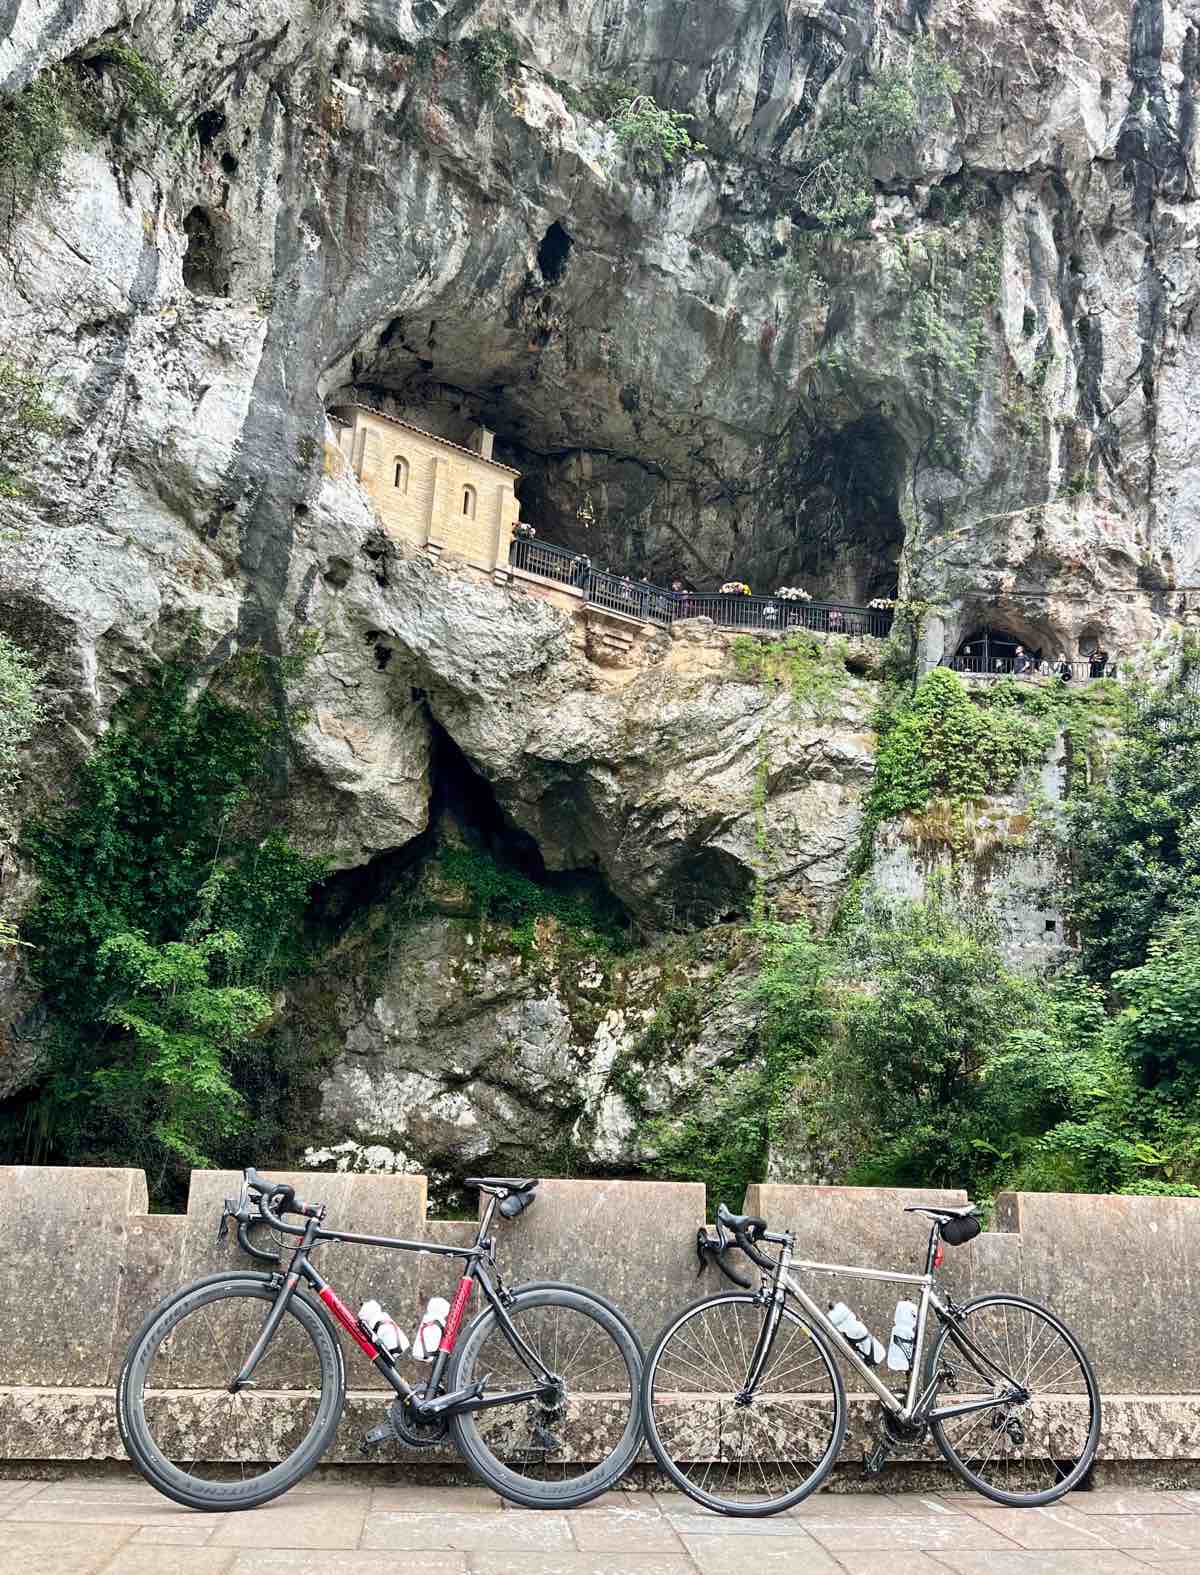 bikerumor pic of the day two bicycles lean against a concrete wall below a cliff with what appears to be a building inside the mouth of a cave.